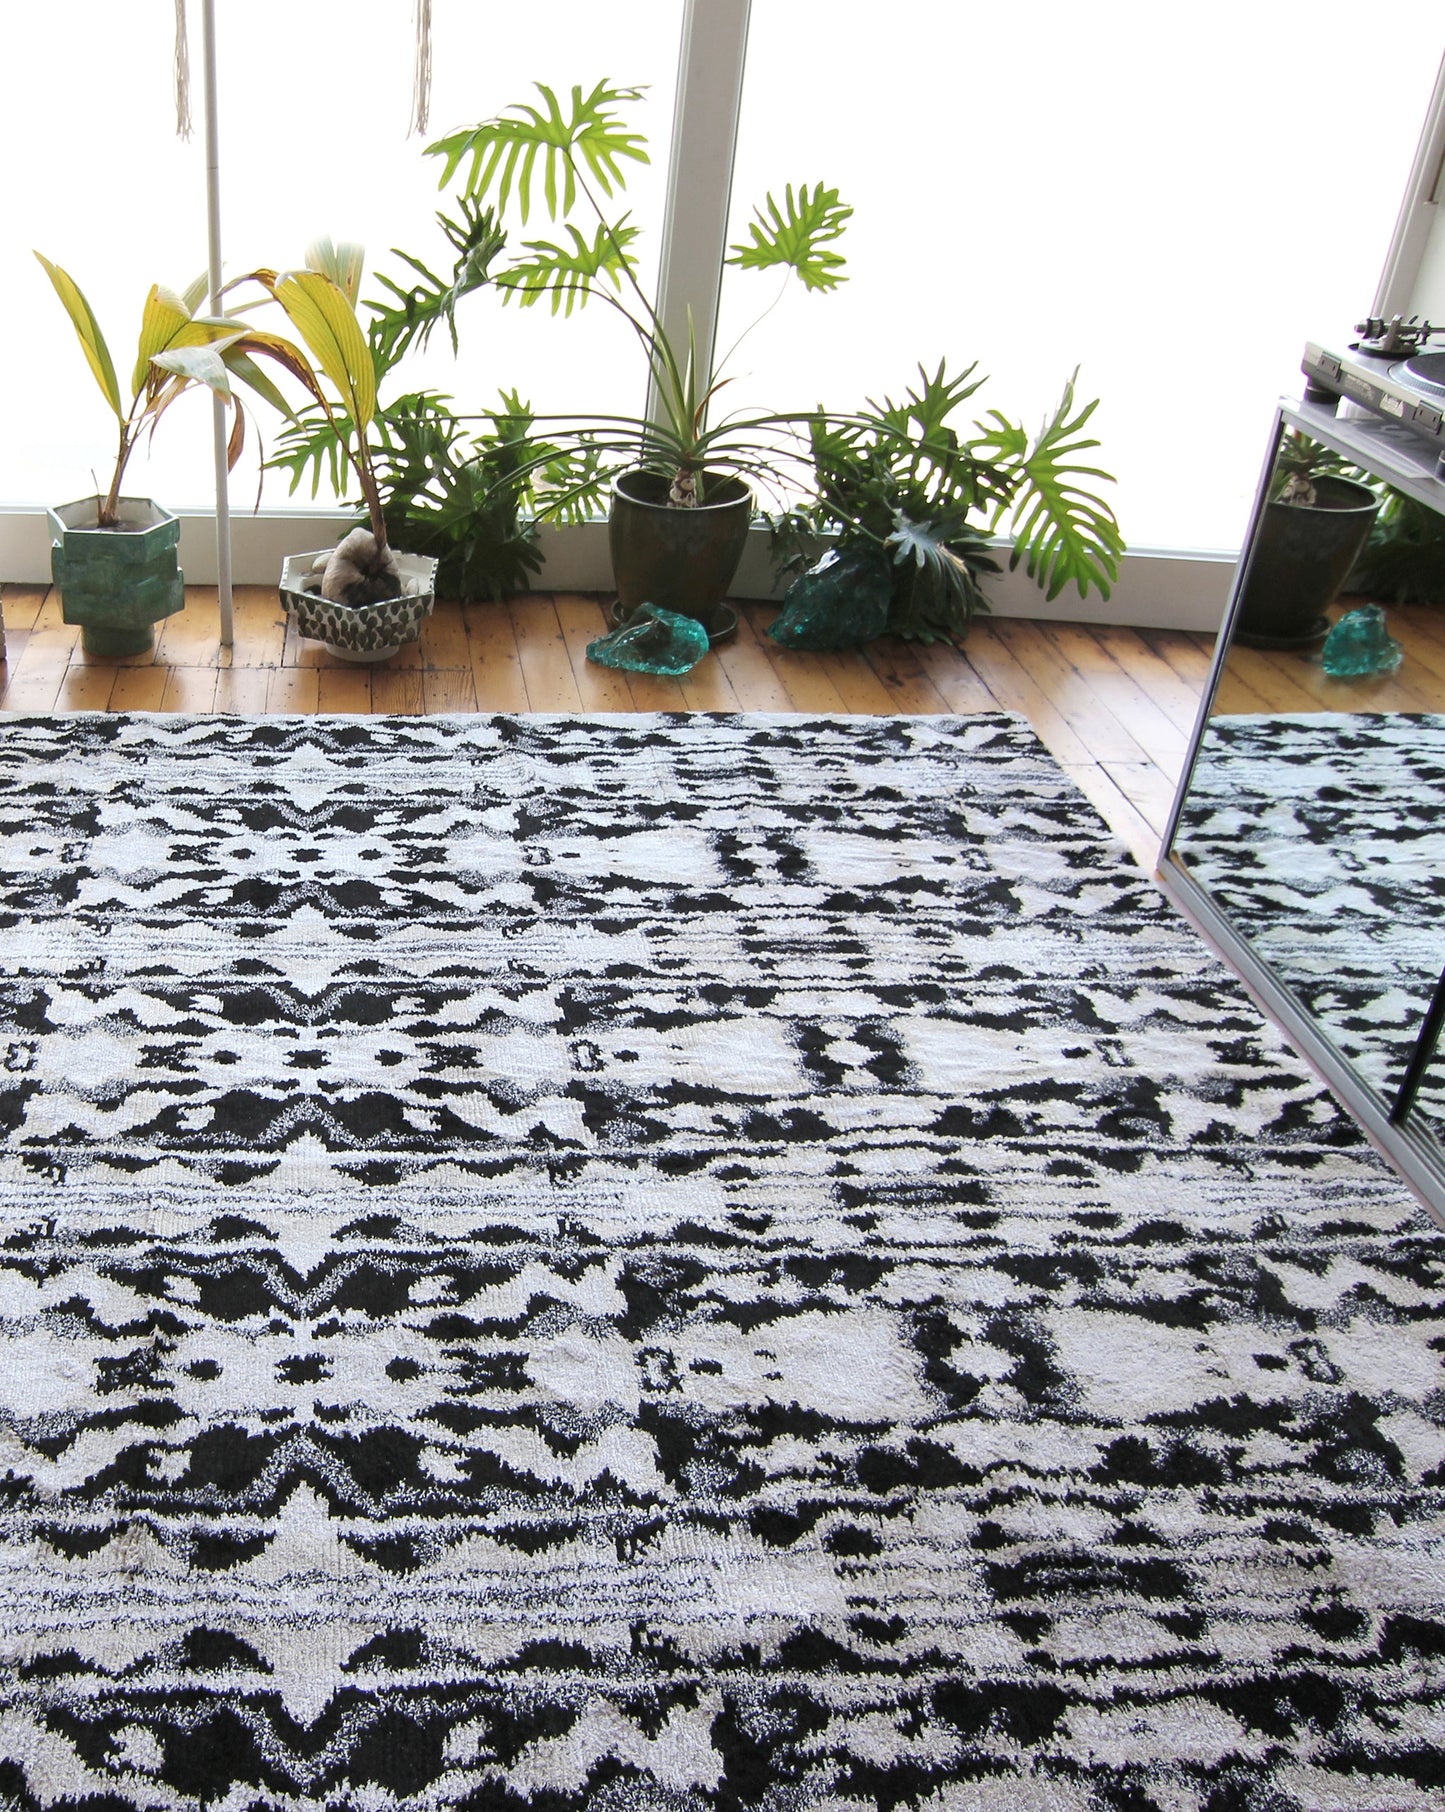 A Biami Hand Knotted Rug 8' x 10' Black in a living room